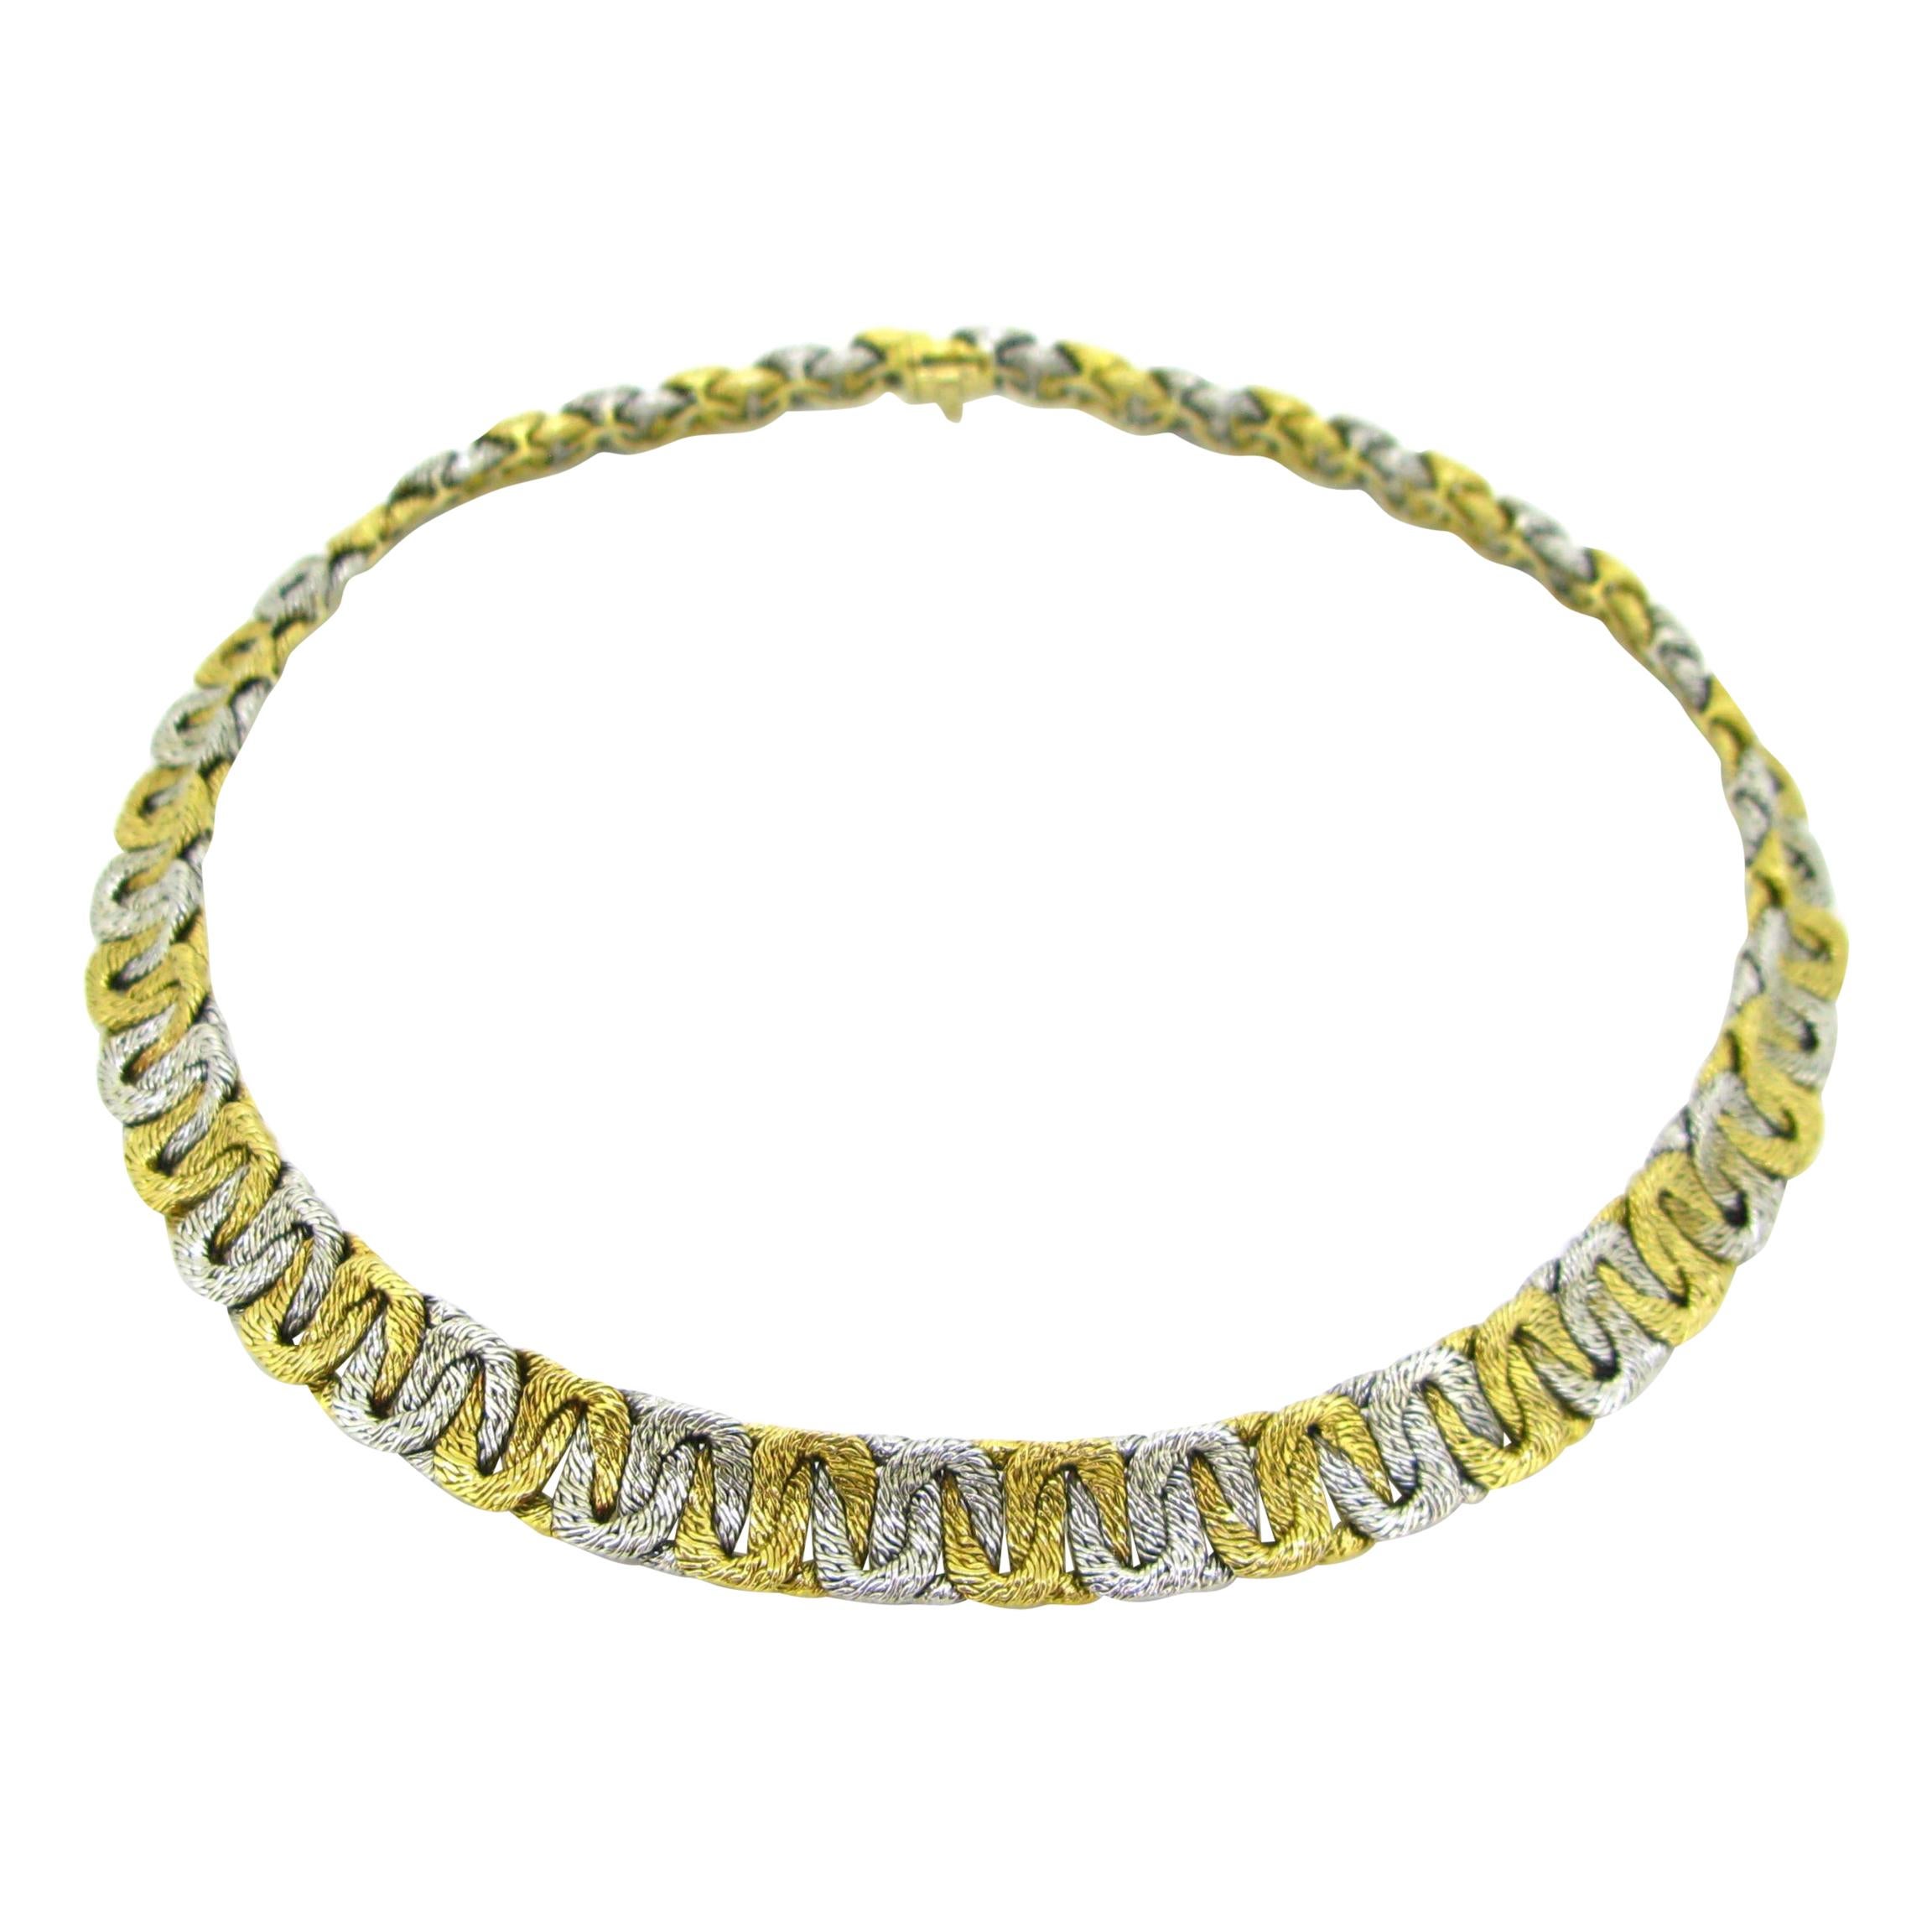 Two Tones Gold Woven Collar Necklace by Georges Lenfant, 18kt gold, France, c1965